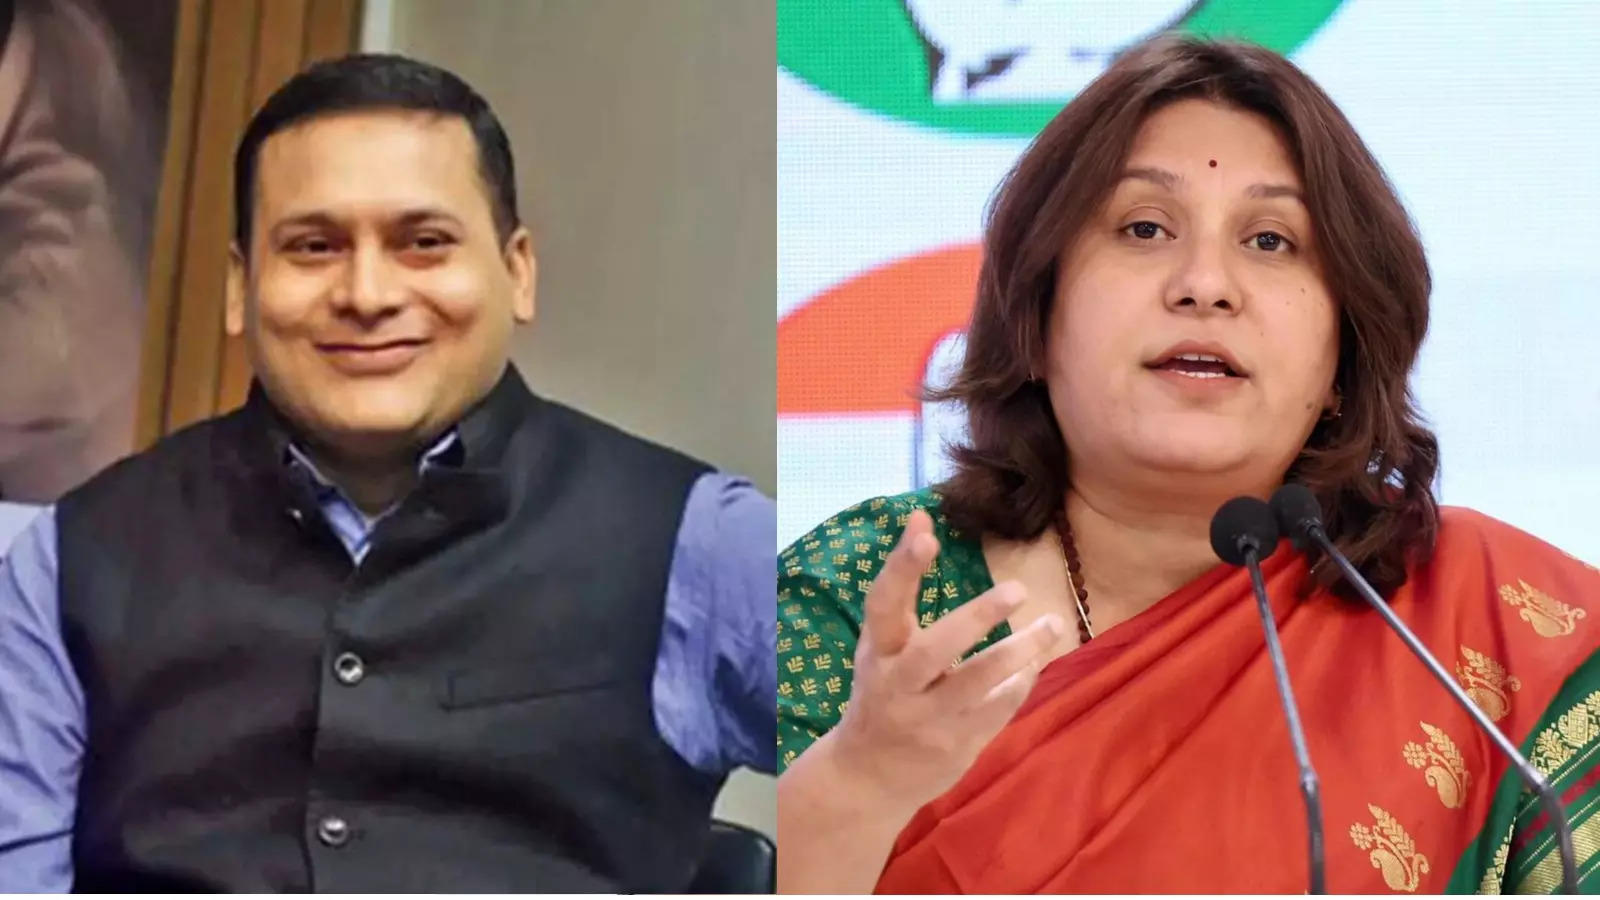 BJP IT cell chief Amit Malviya accused of sexual harassment, Congress said- he should be removed from the post immediately